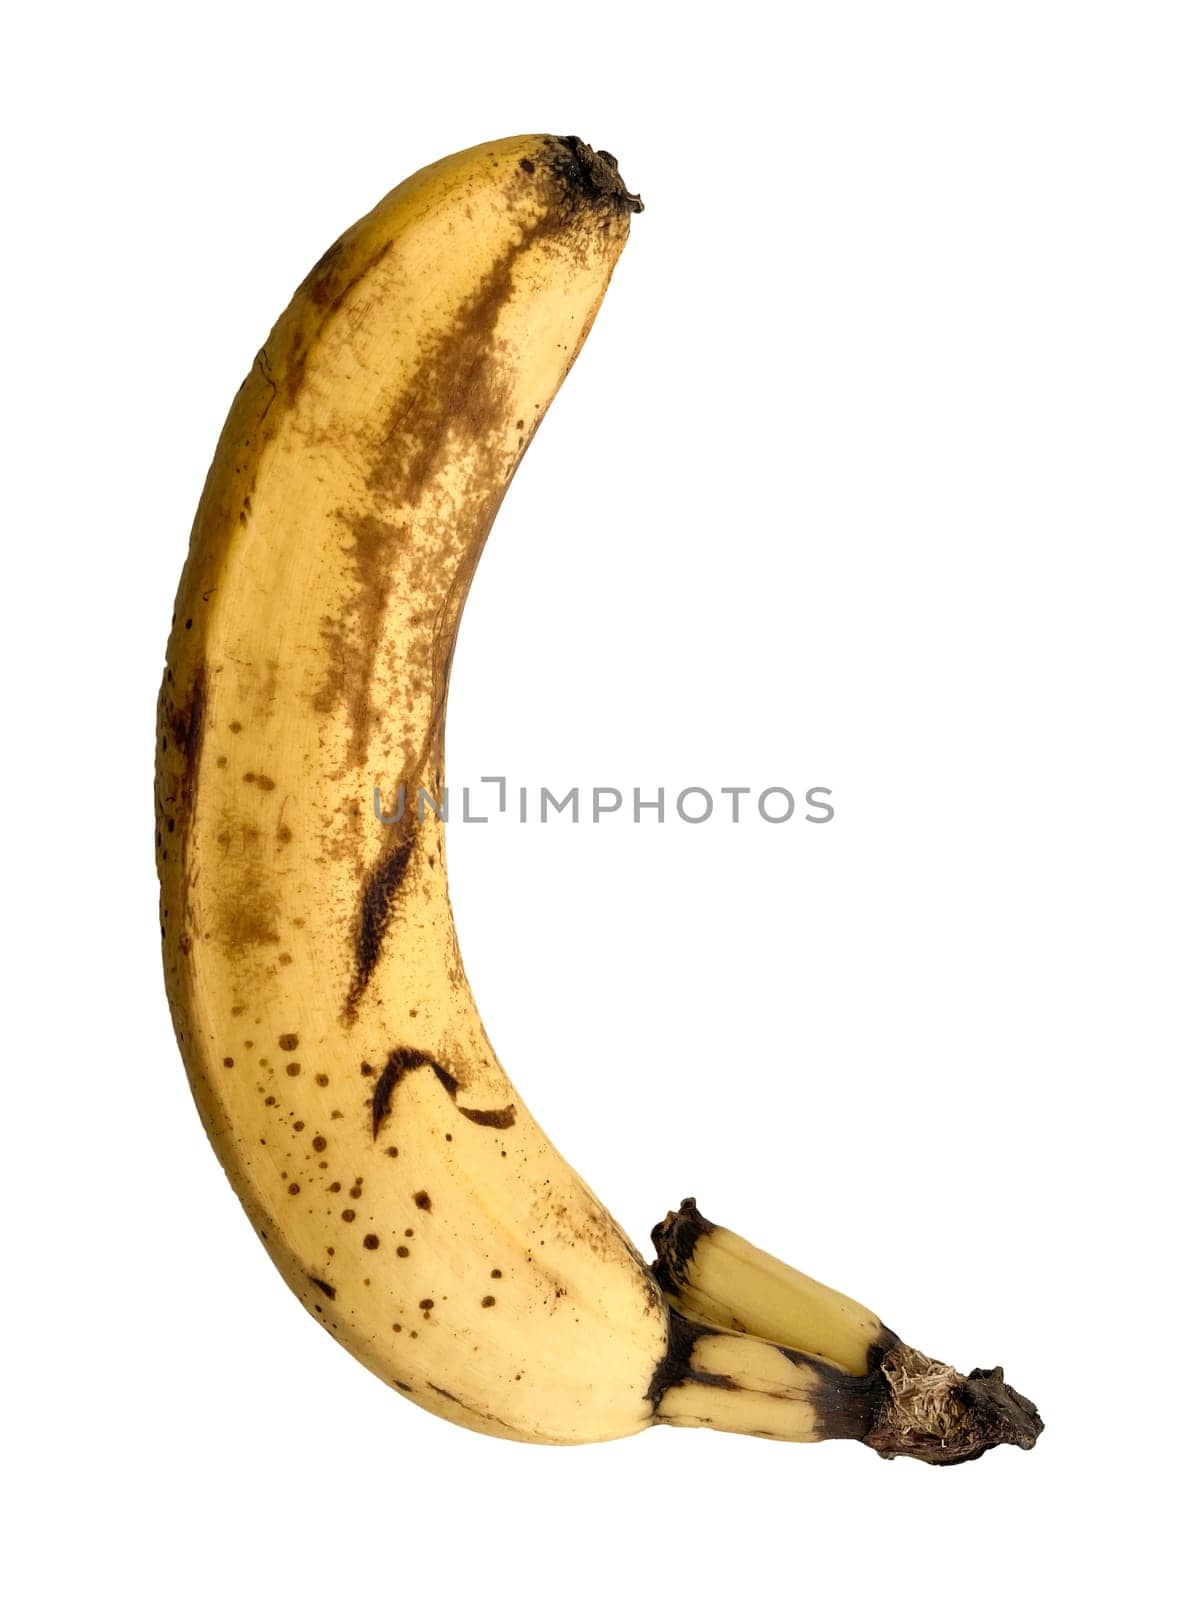 not a fresh banana on a white background.